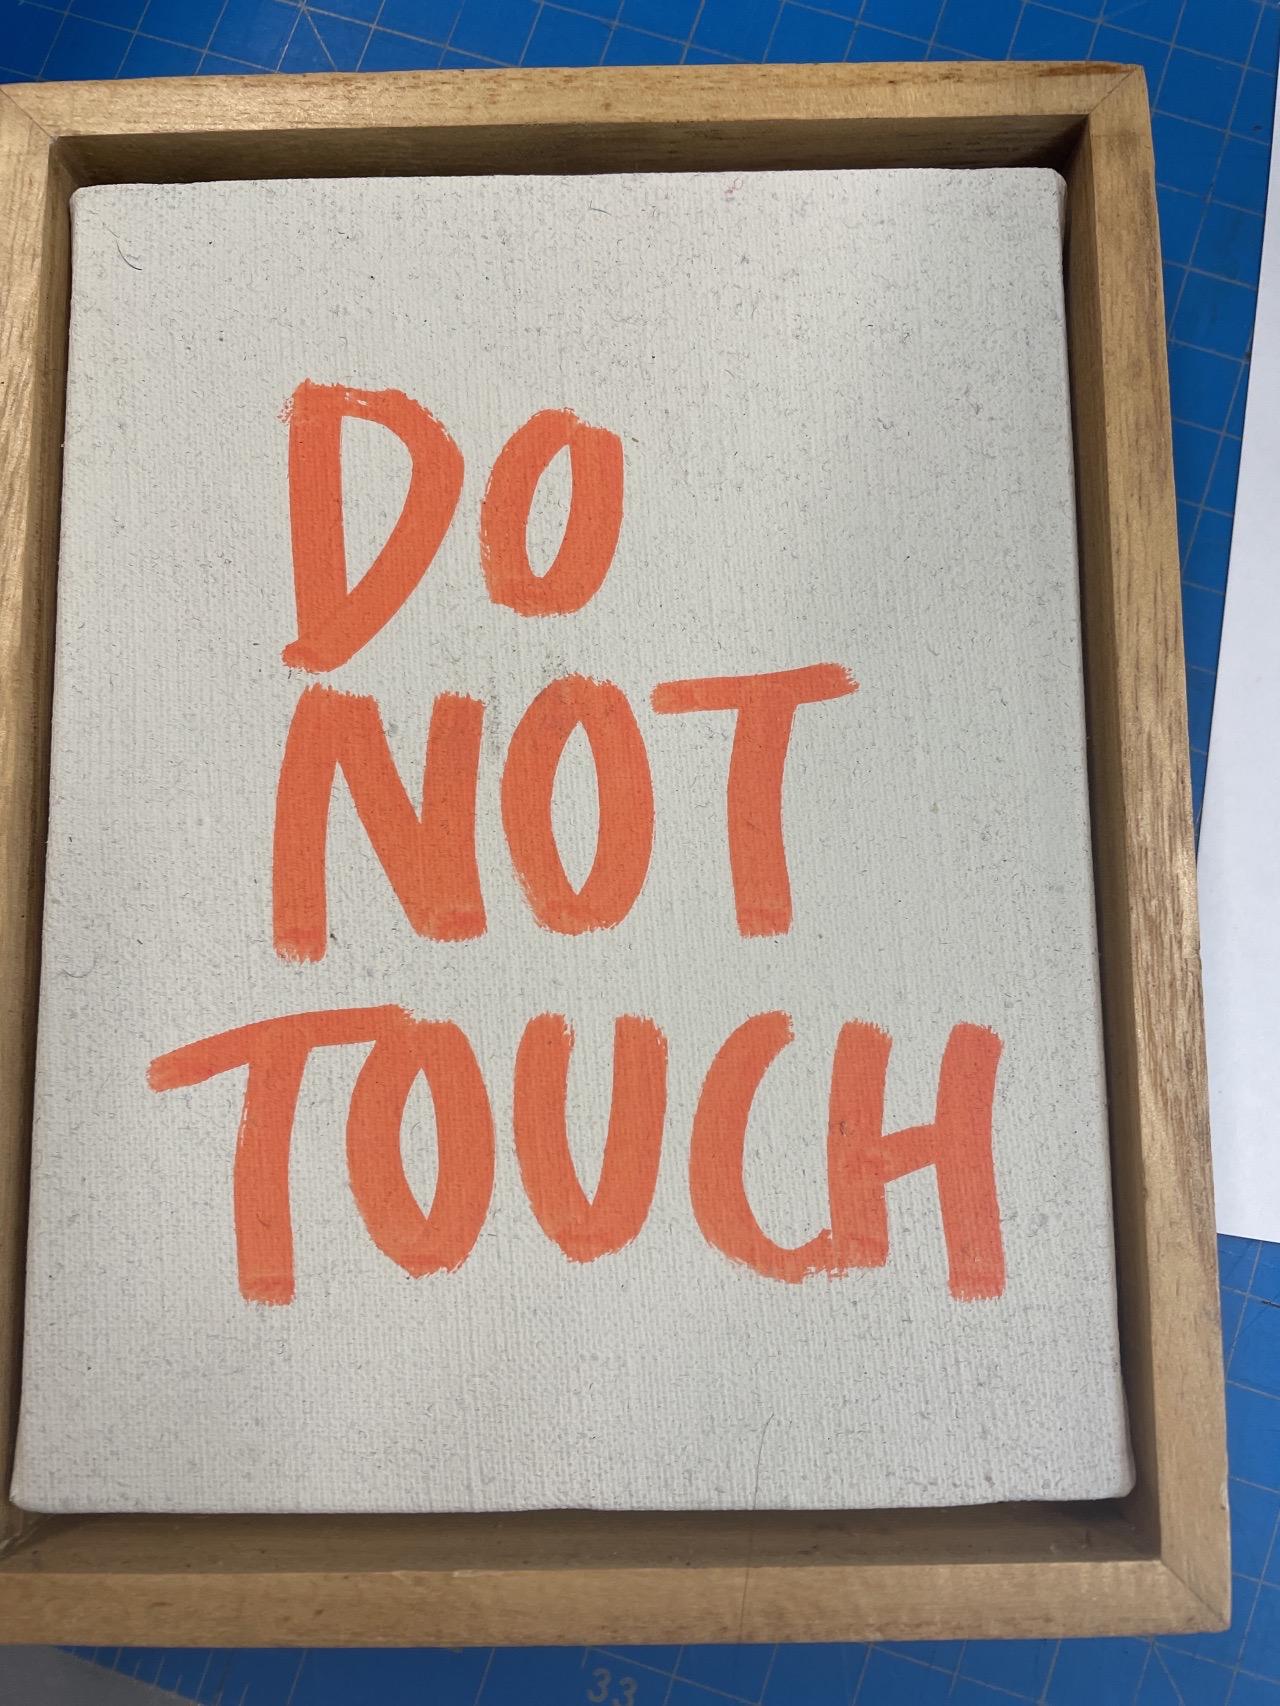 Do Not Touch (Color) 2020. Sculpture, Limited Edition of 250 by Javier Calleja For Sale 4